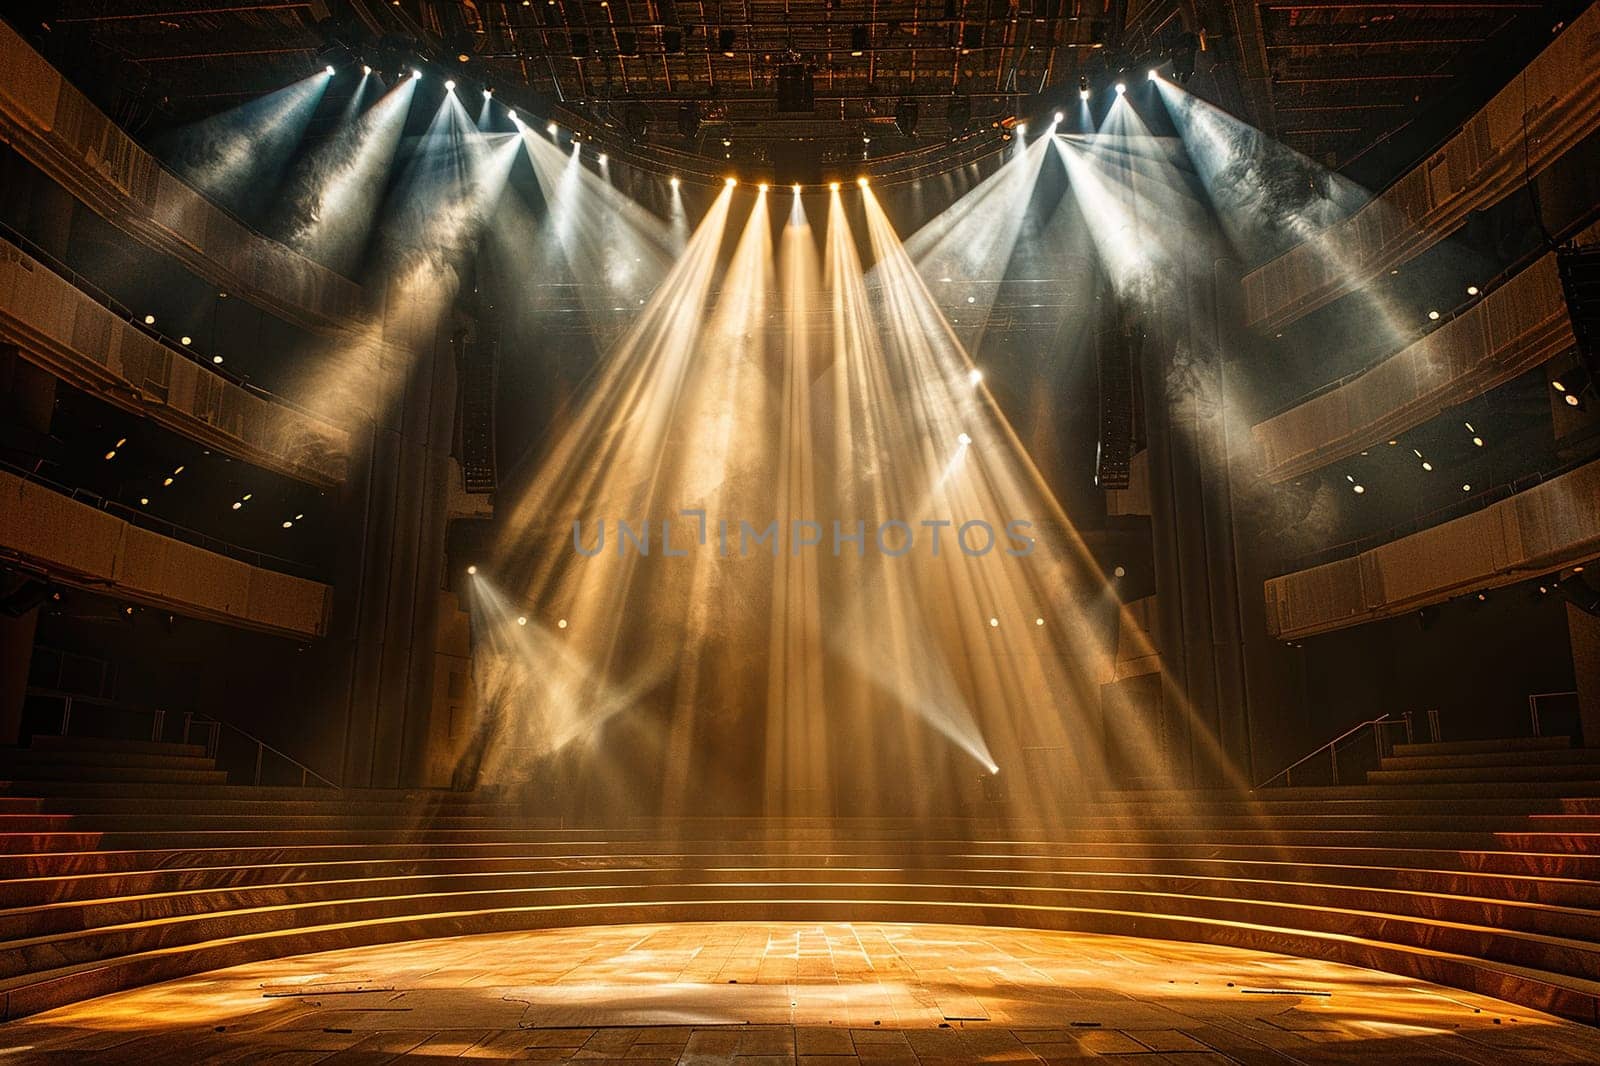 Image of the stage of an empty elegant classical theater with bright spotlights and seating.